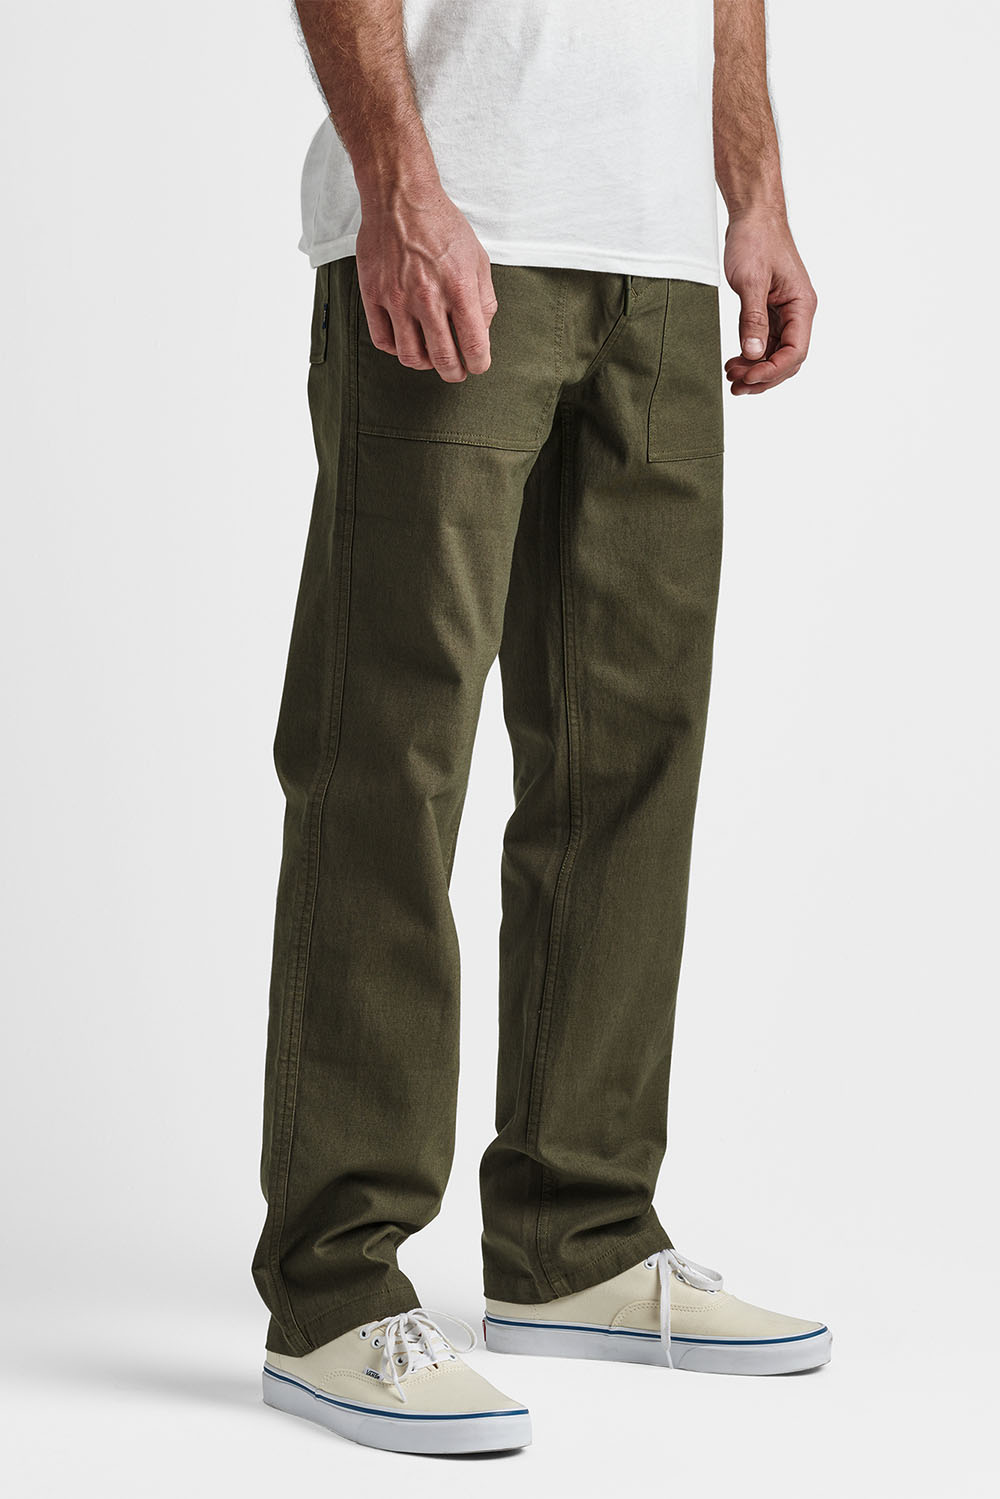 Roark - Layover Utility Pant - Military - Side